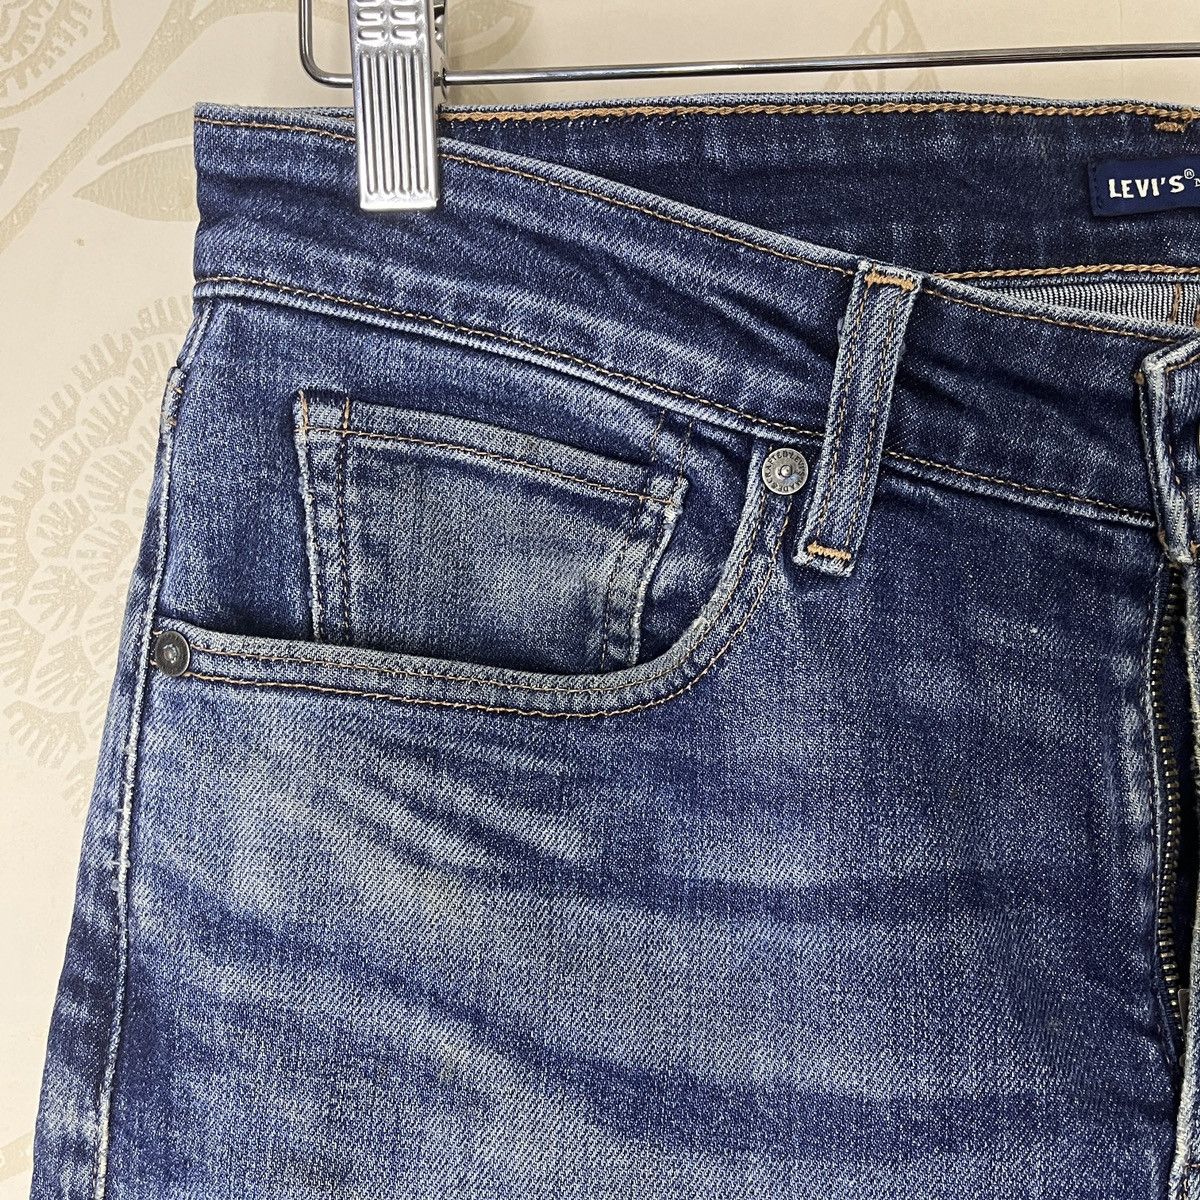 Levis Made & Crafted Blue Label Distressed Denim Jeans - 13